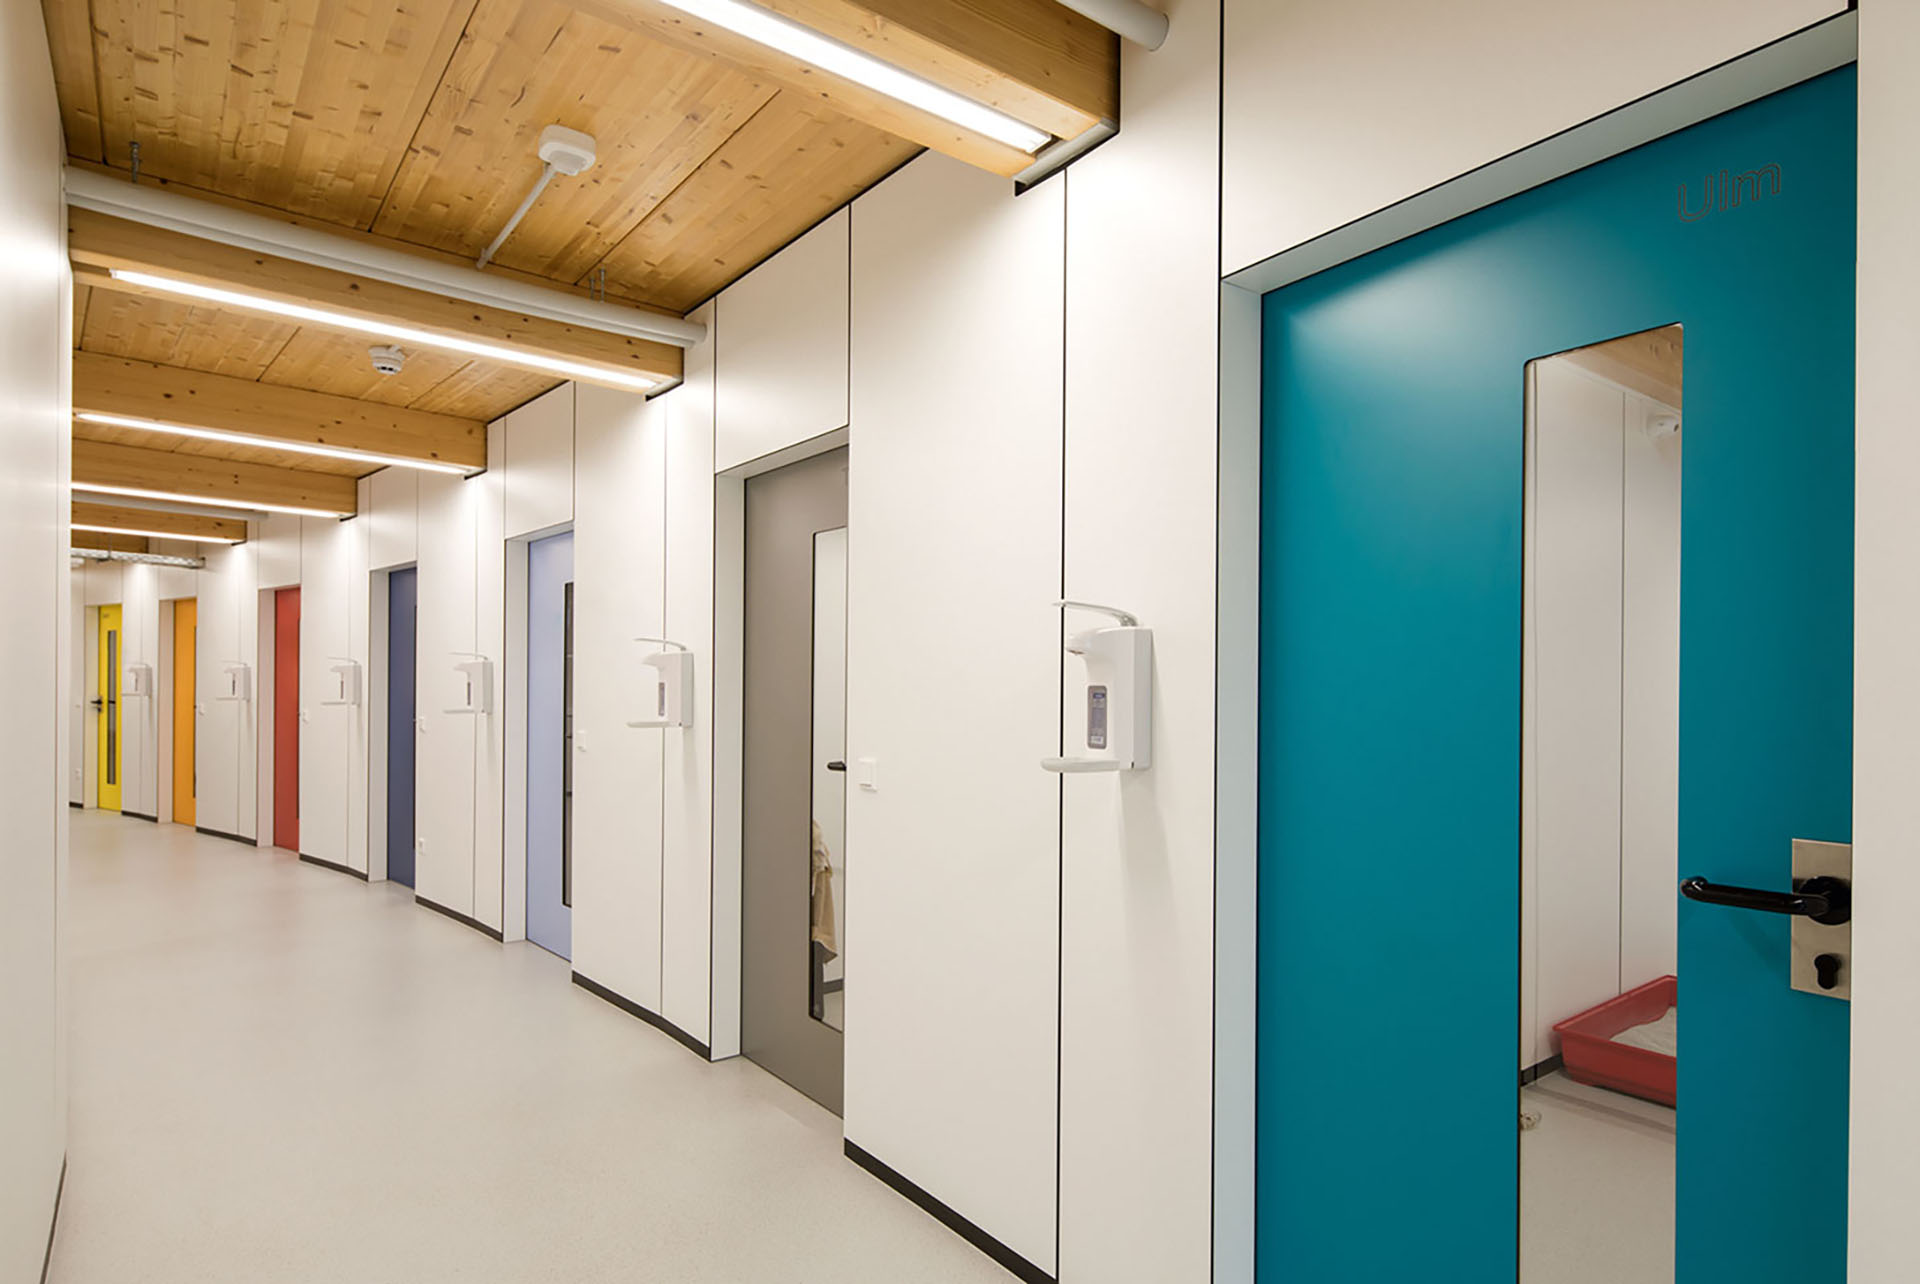 Technical and fire doors